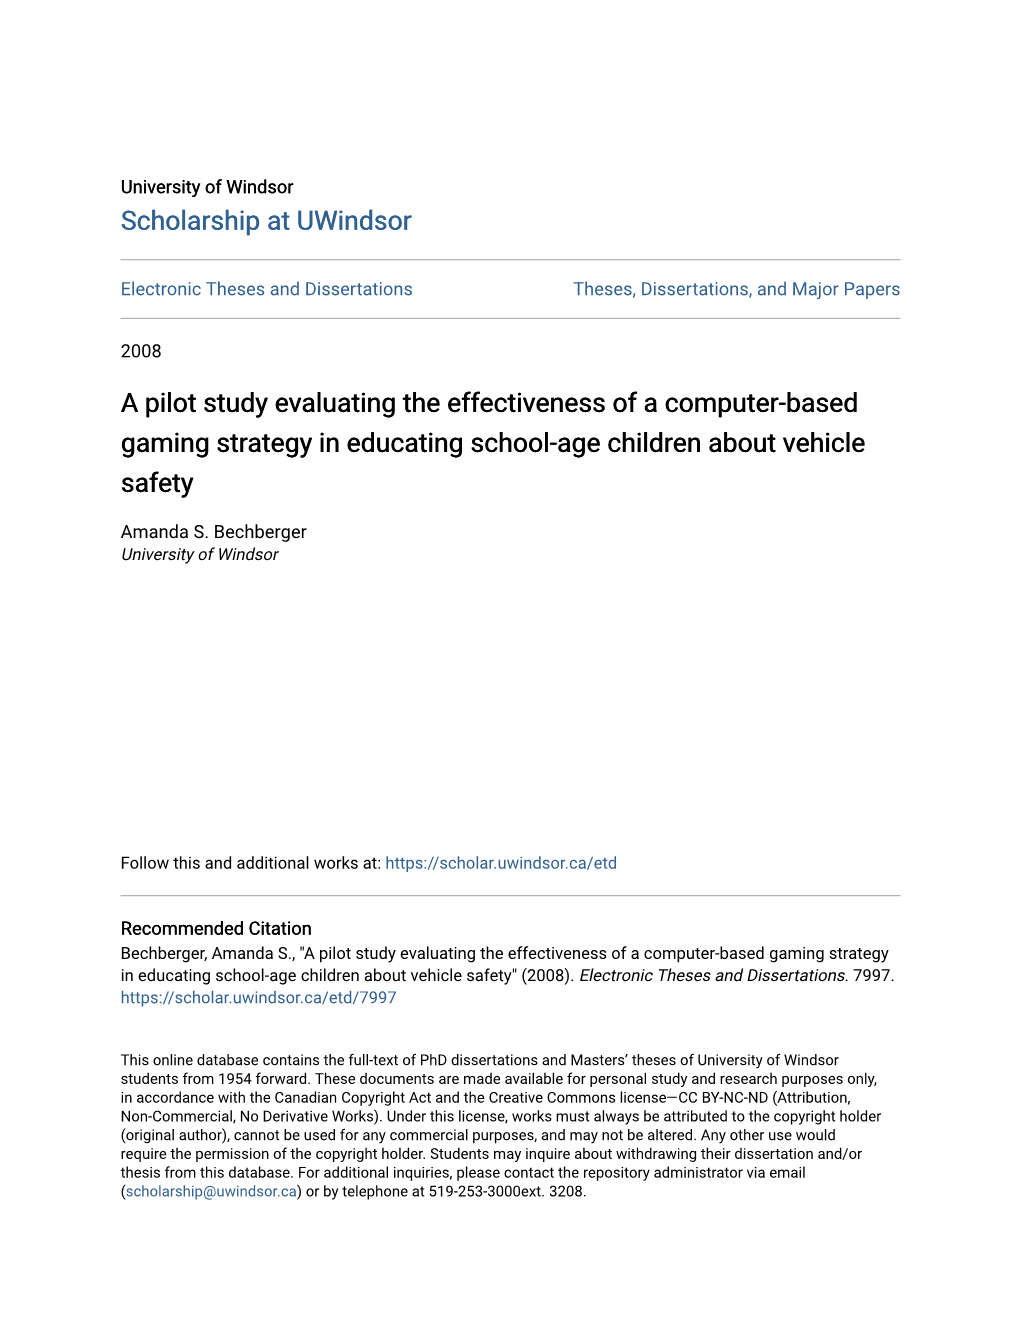 A Pilot Study Evaluating the Effectiveness of a Computer-Based Gaming Strategy in Educating School-Age Children About Vehicle Safety